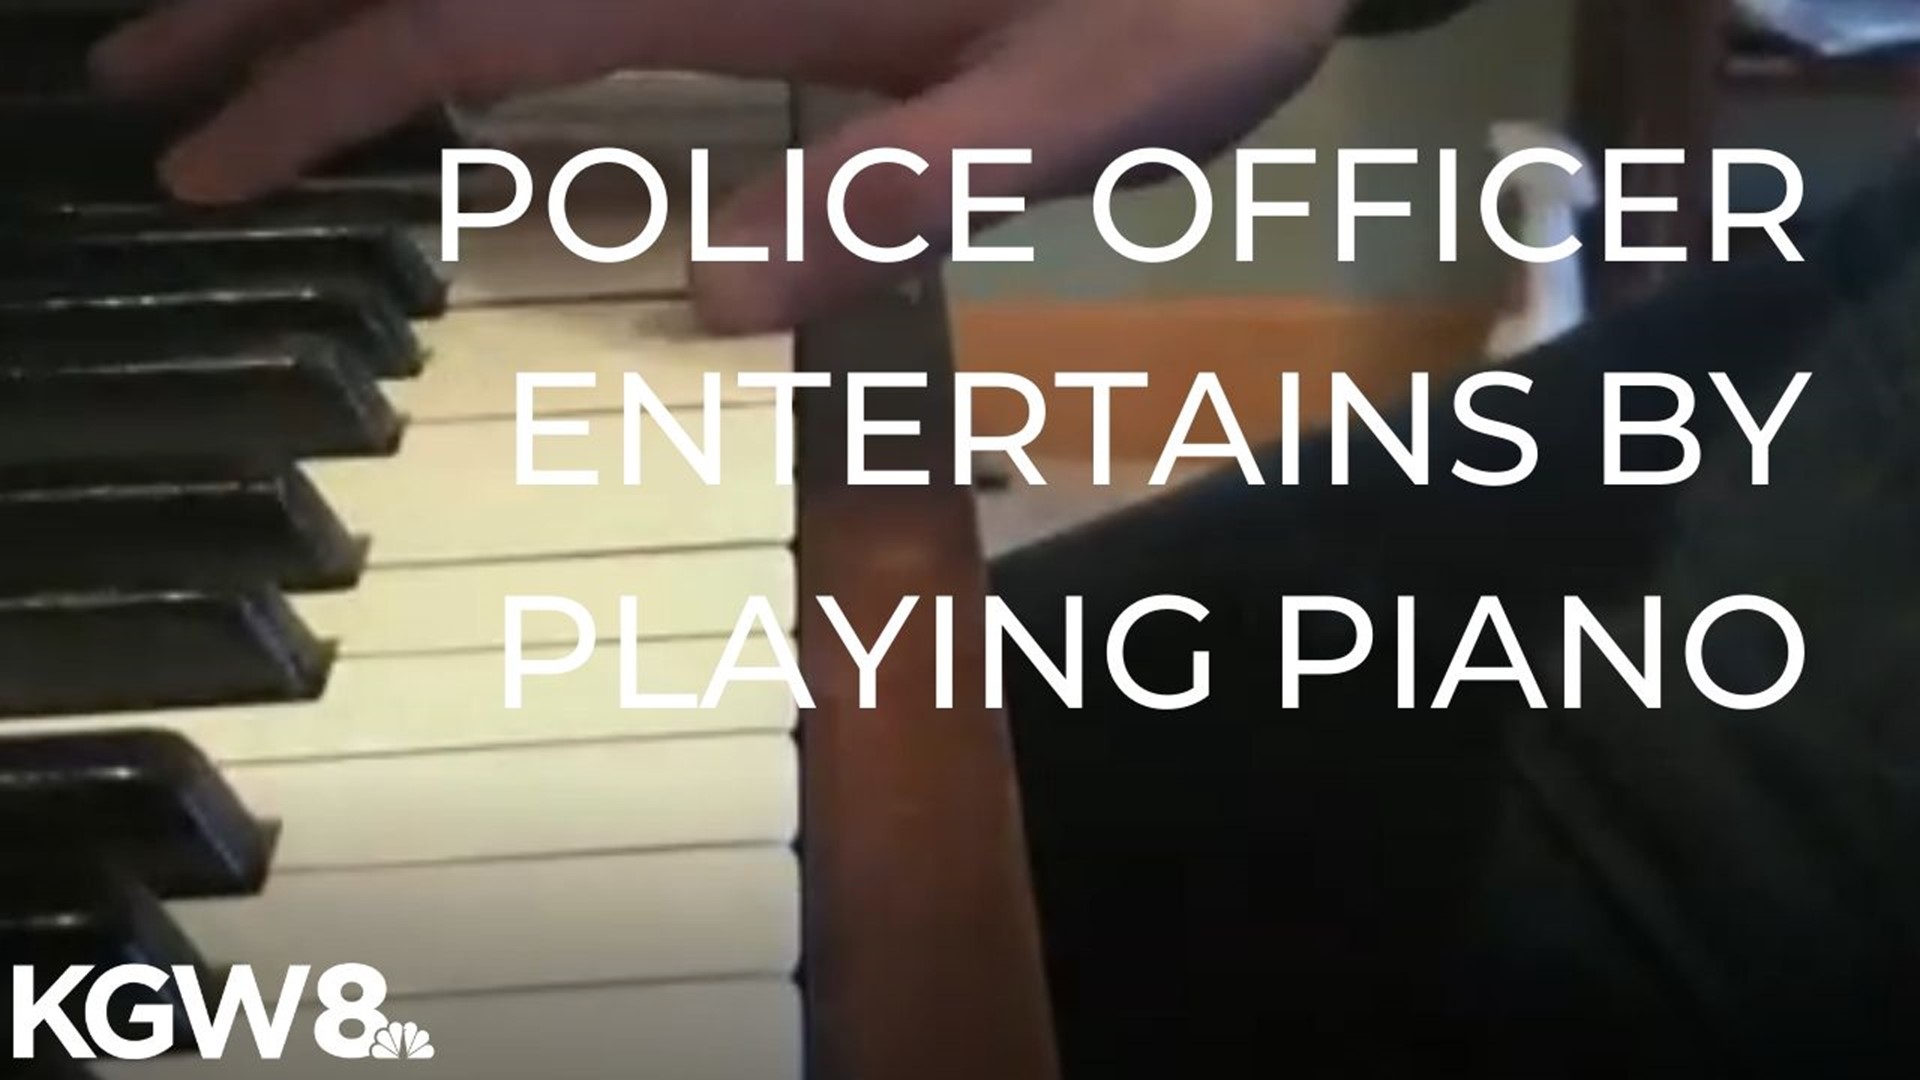 A Hillsboro police officer is uniting the community by playing the piano.